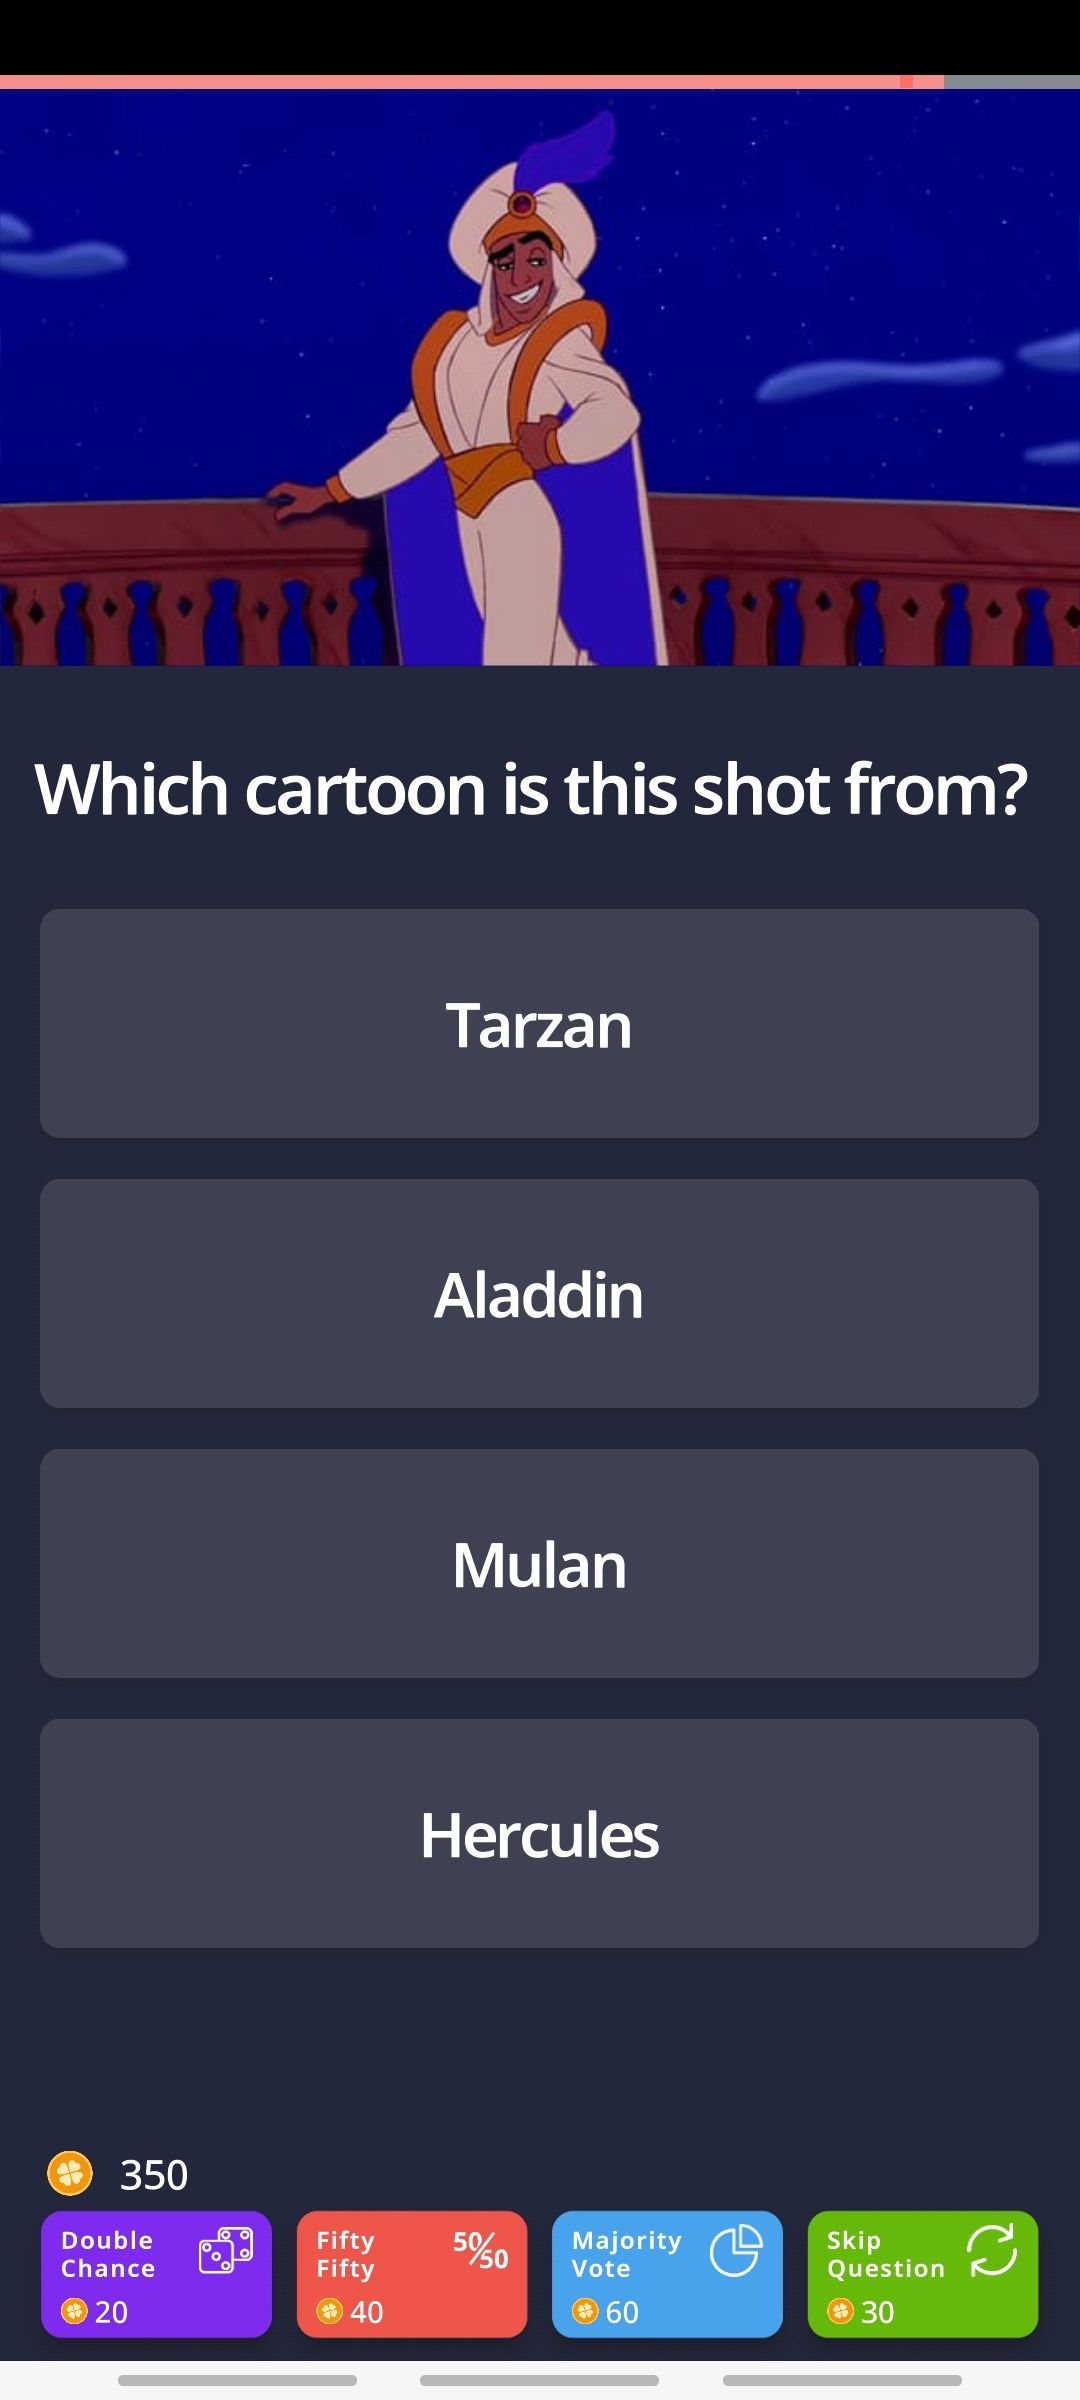 quizzland app asking which cartoon a character is from, showing an image from aladdin